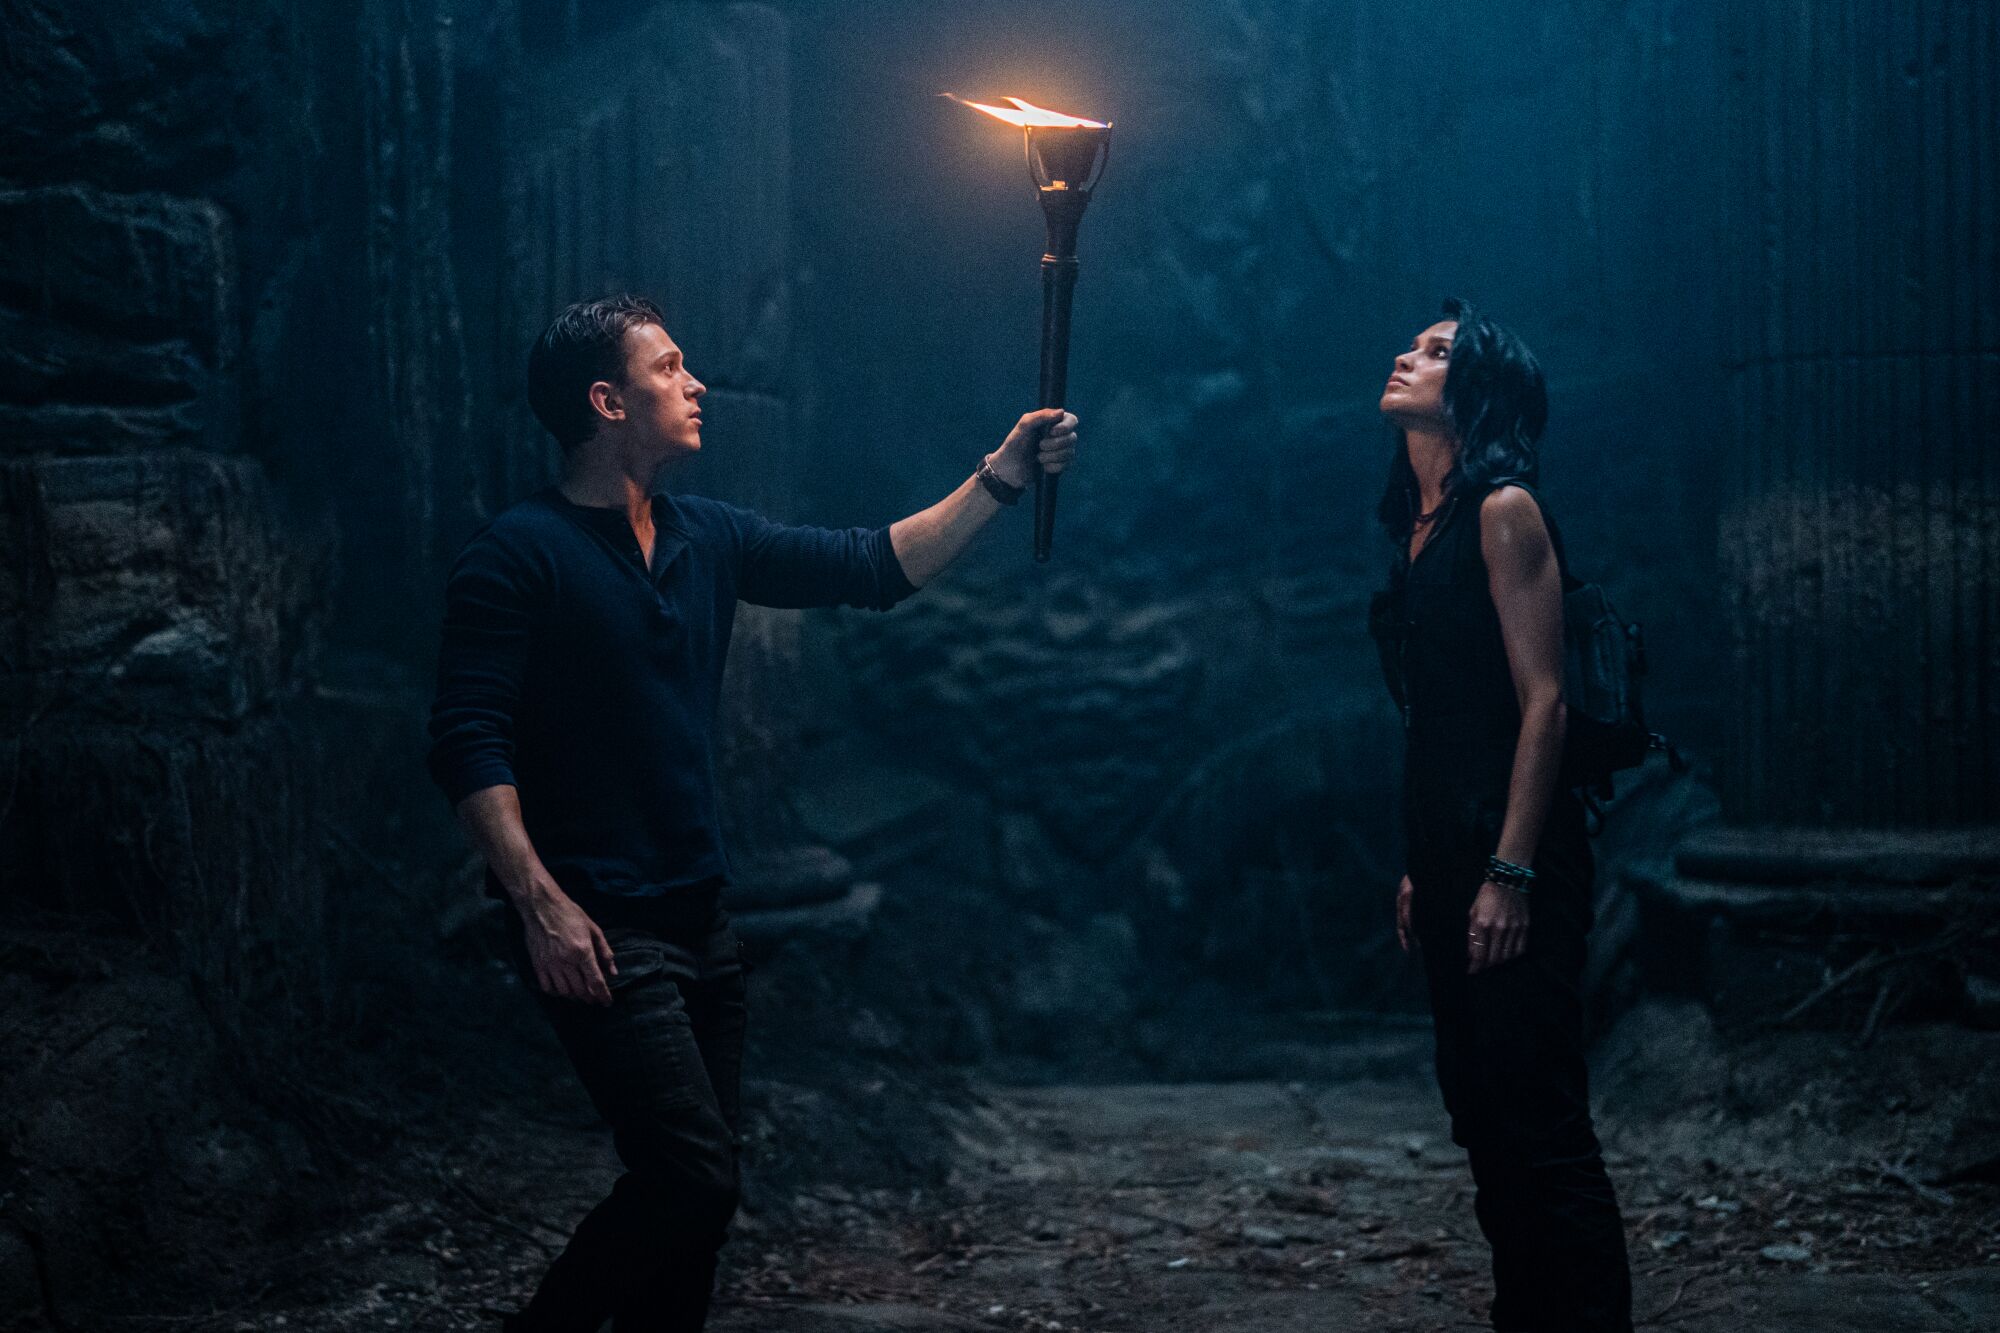 A man holds a torch in a dark space as he and a woman look around.